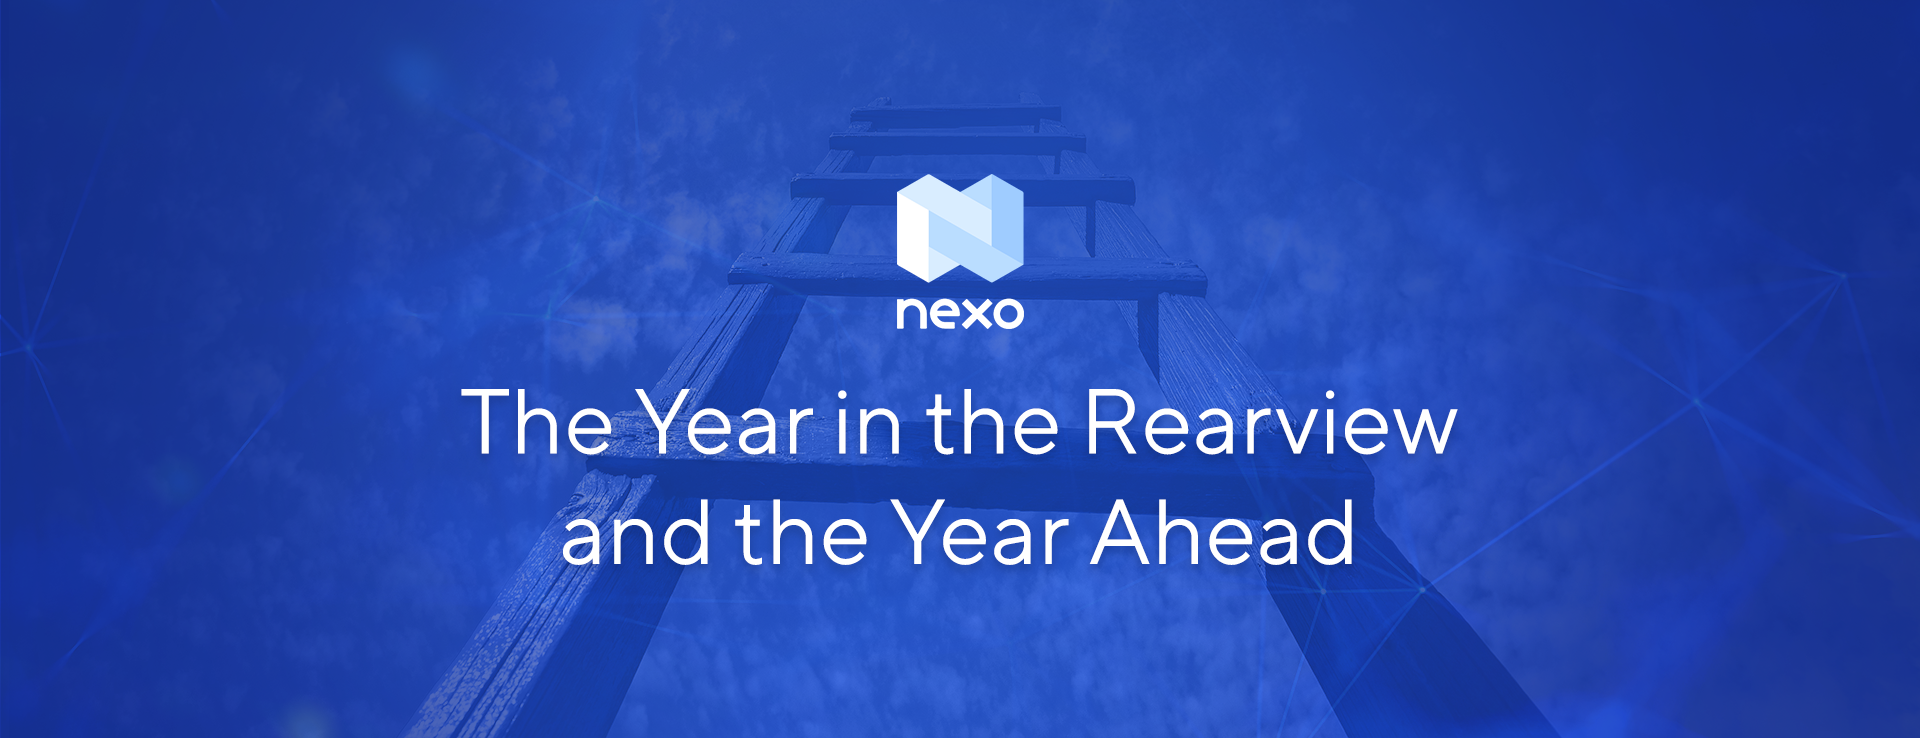 The Year in the Rearview, the Year Ahead